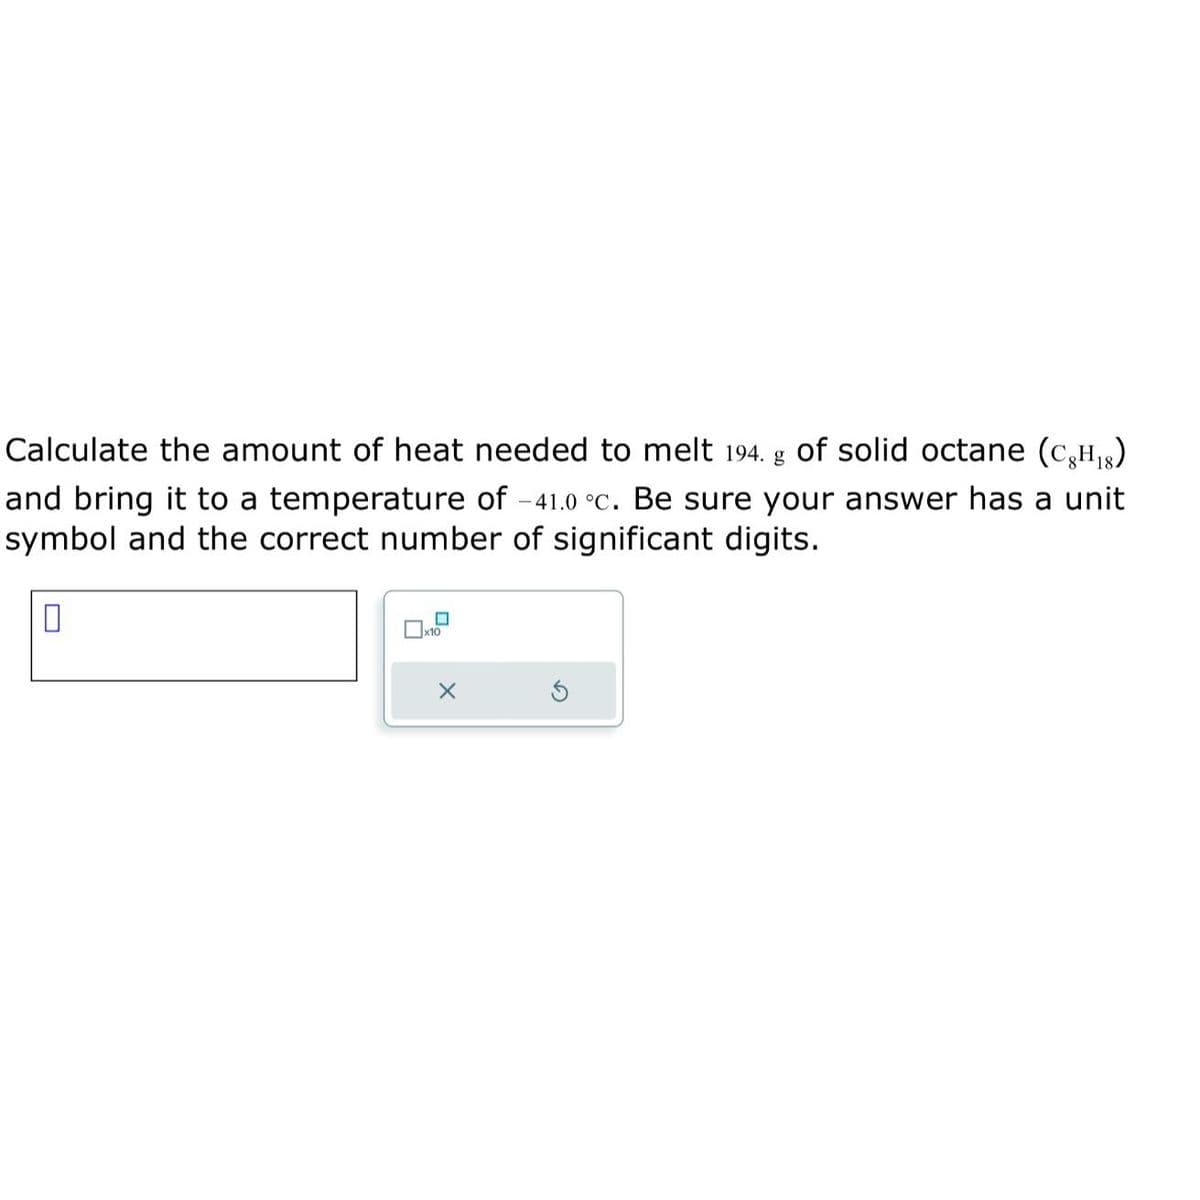 Calculate the amount of heat needed to melt 194. g of solid octane (C₂H₁)
and bring it to a temperature of -41.0 °c. Be sure your answer has a unit
symbol and the correct number of significant digits.
0
x10
X